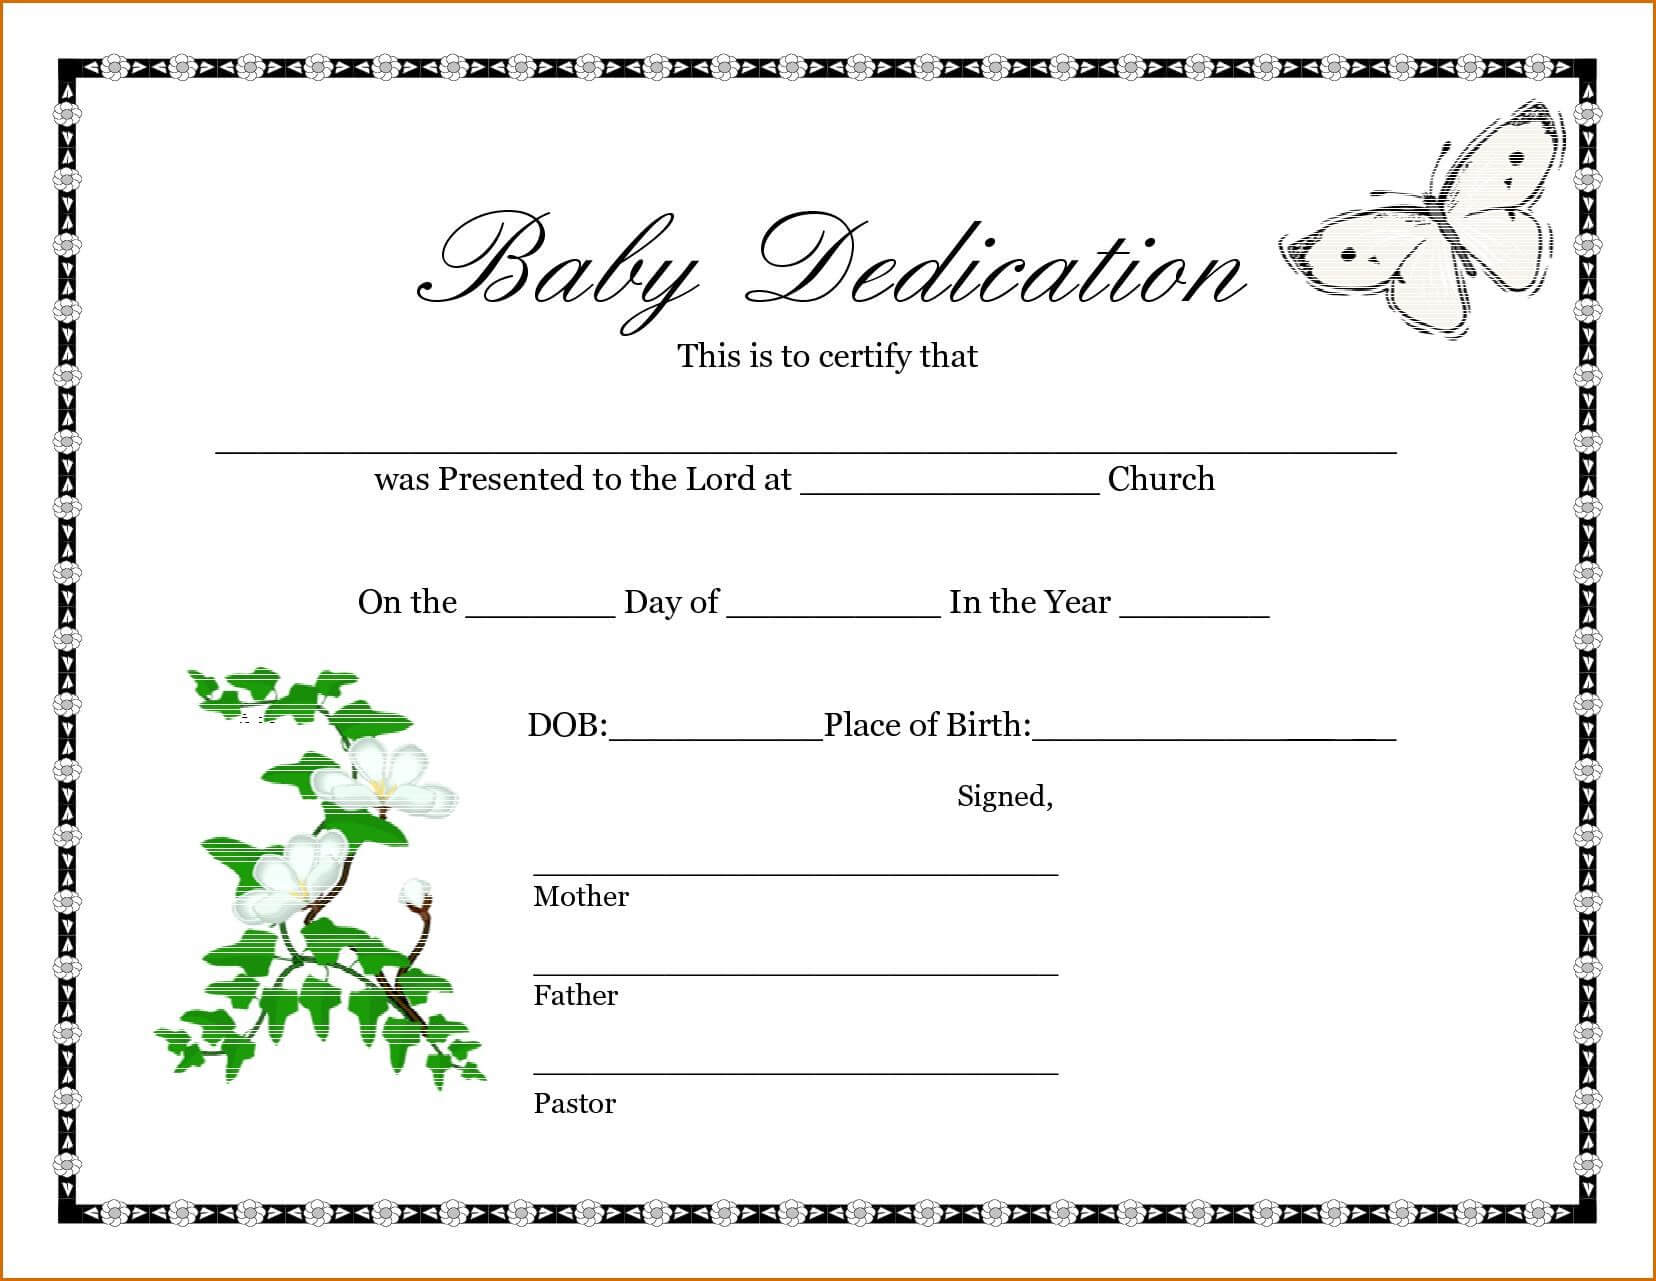 025 Template Ideas Baby Dedication Certificate Wonderful With Regard To Birth Certificate Fake Template